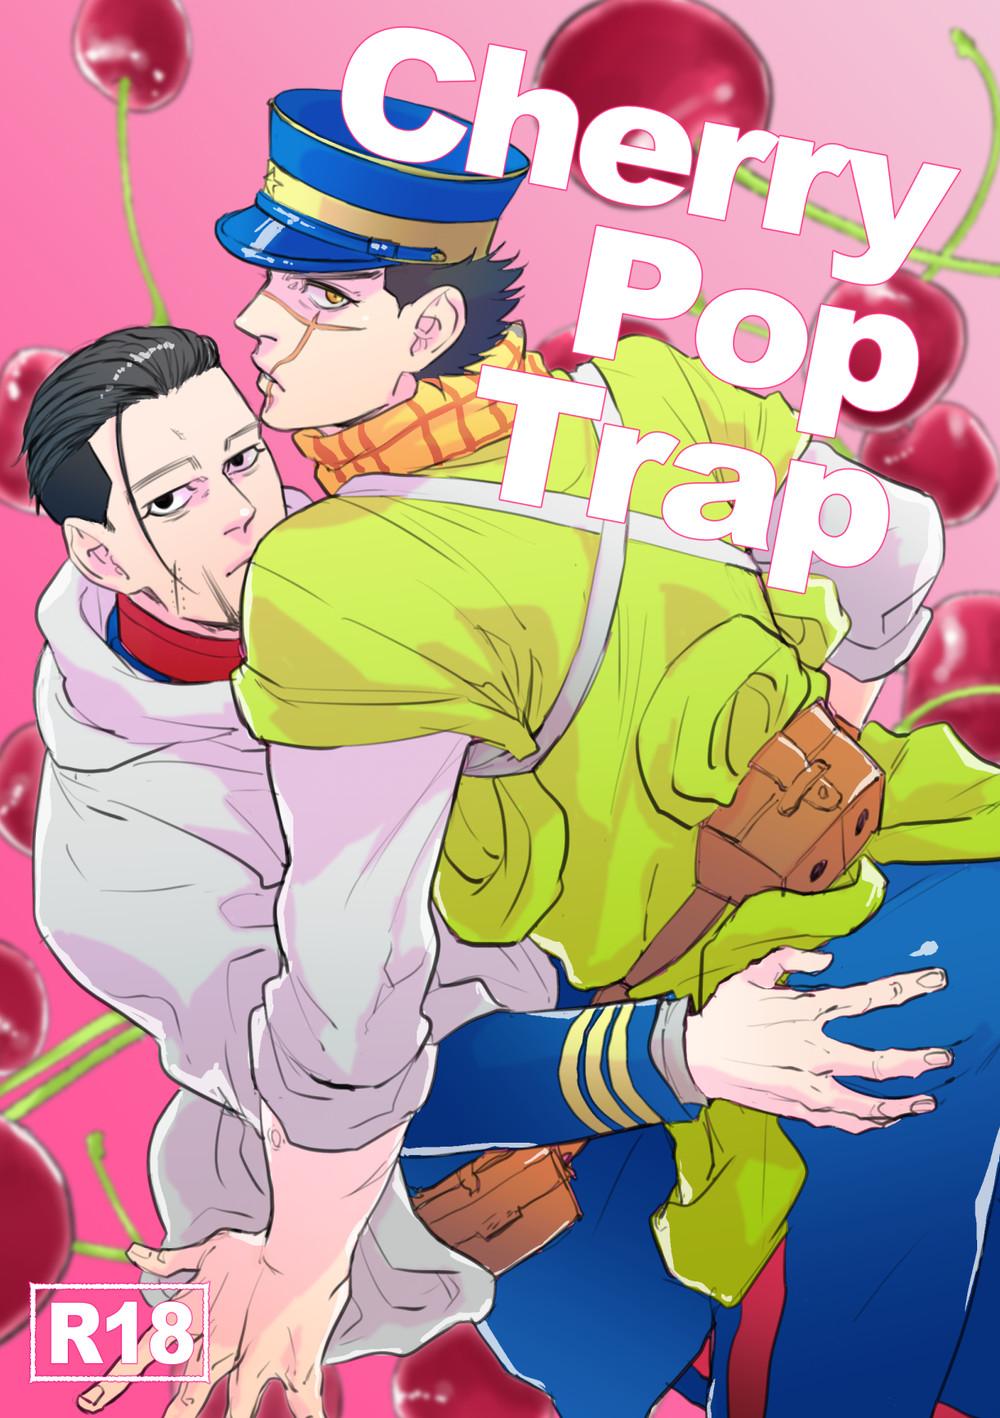 Webcamsex Cherry Pop Trap - Golden kamuy Family Roleplay - Page 1